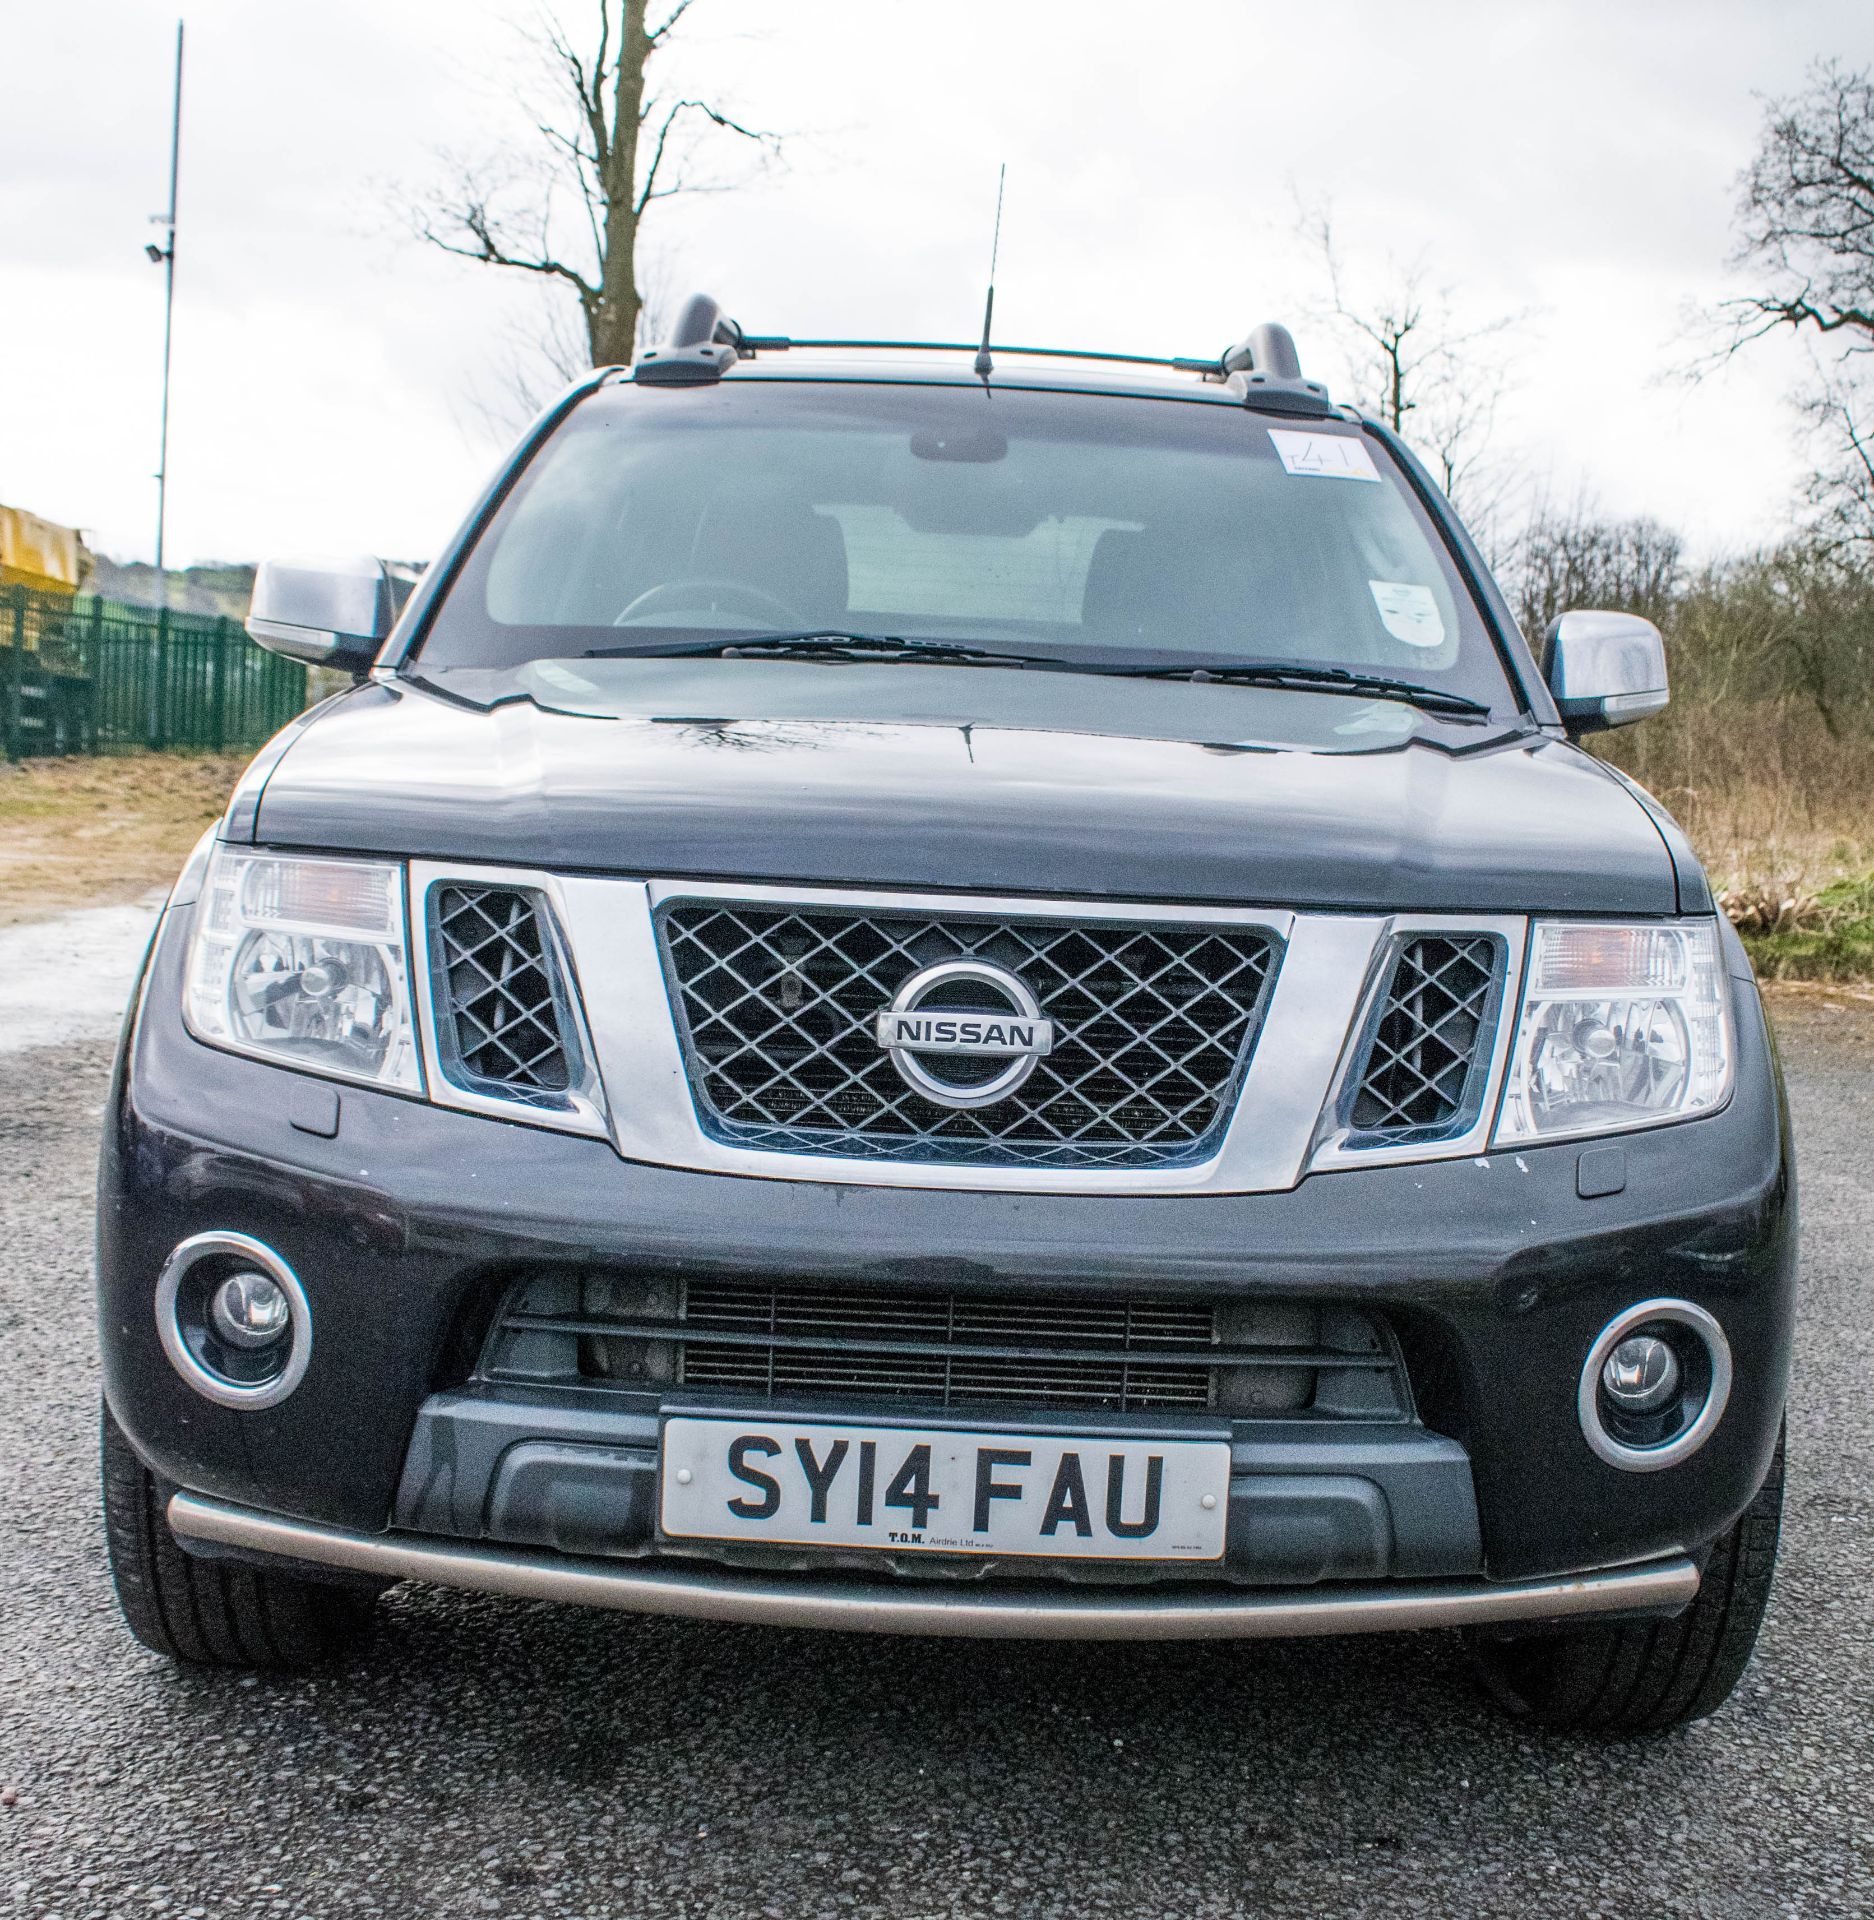 Nissan Navara Outlaw DCi Auto 3.0 V6 diesel 4 wheel drive pick up Registration Number: SY14 FAU Date - Image 5 of 20